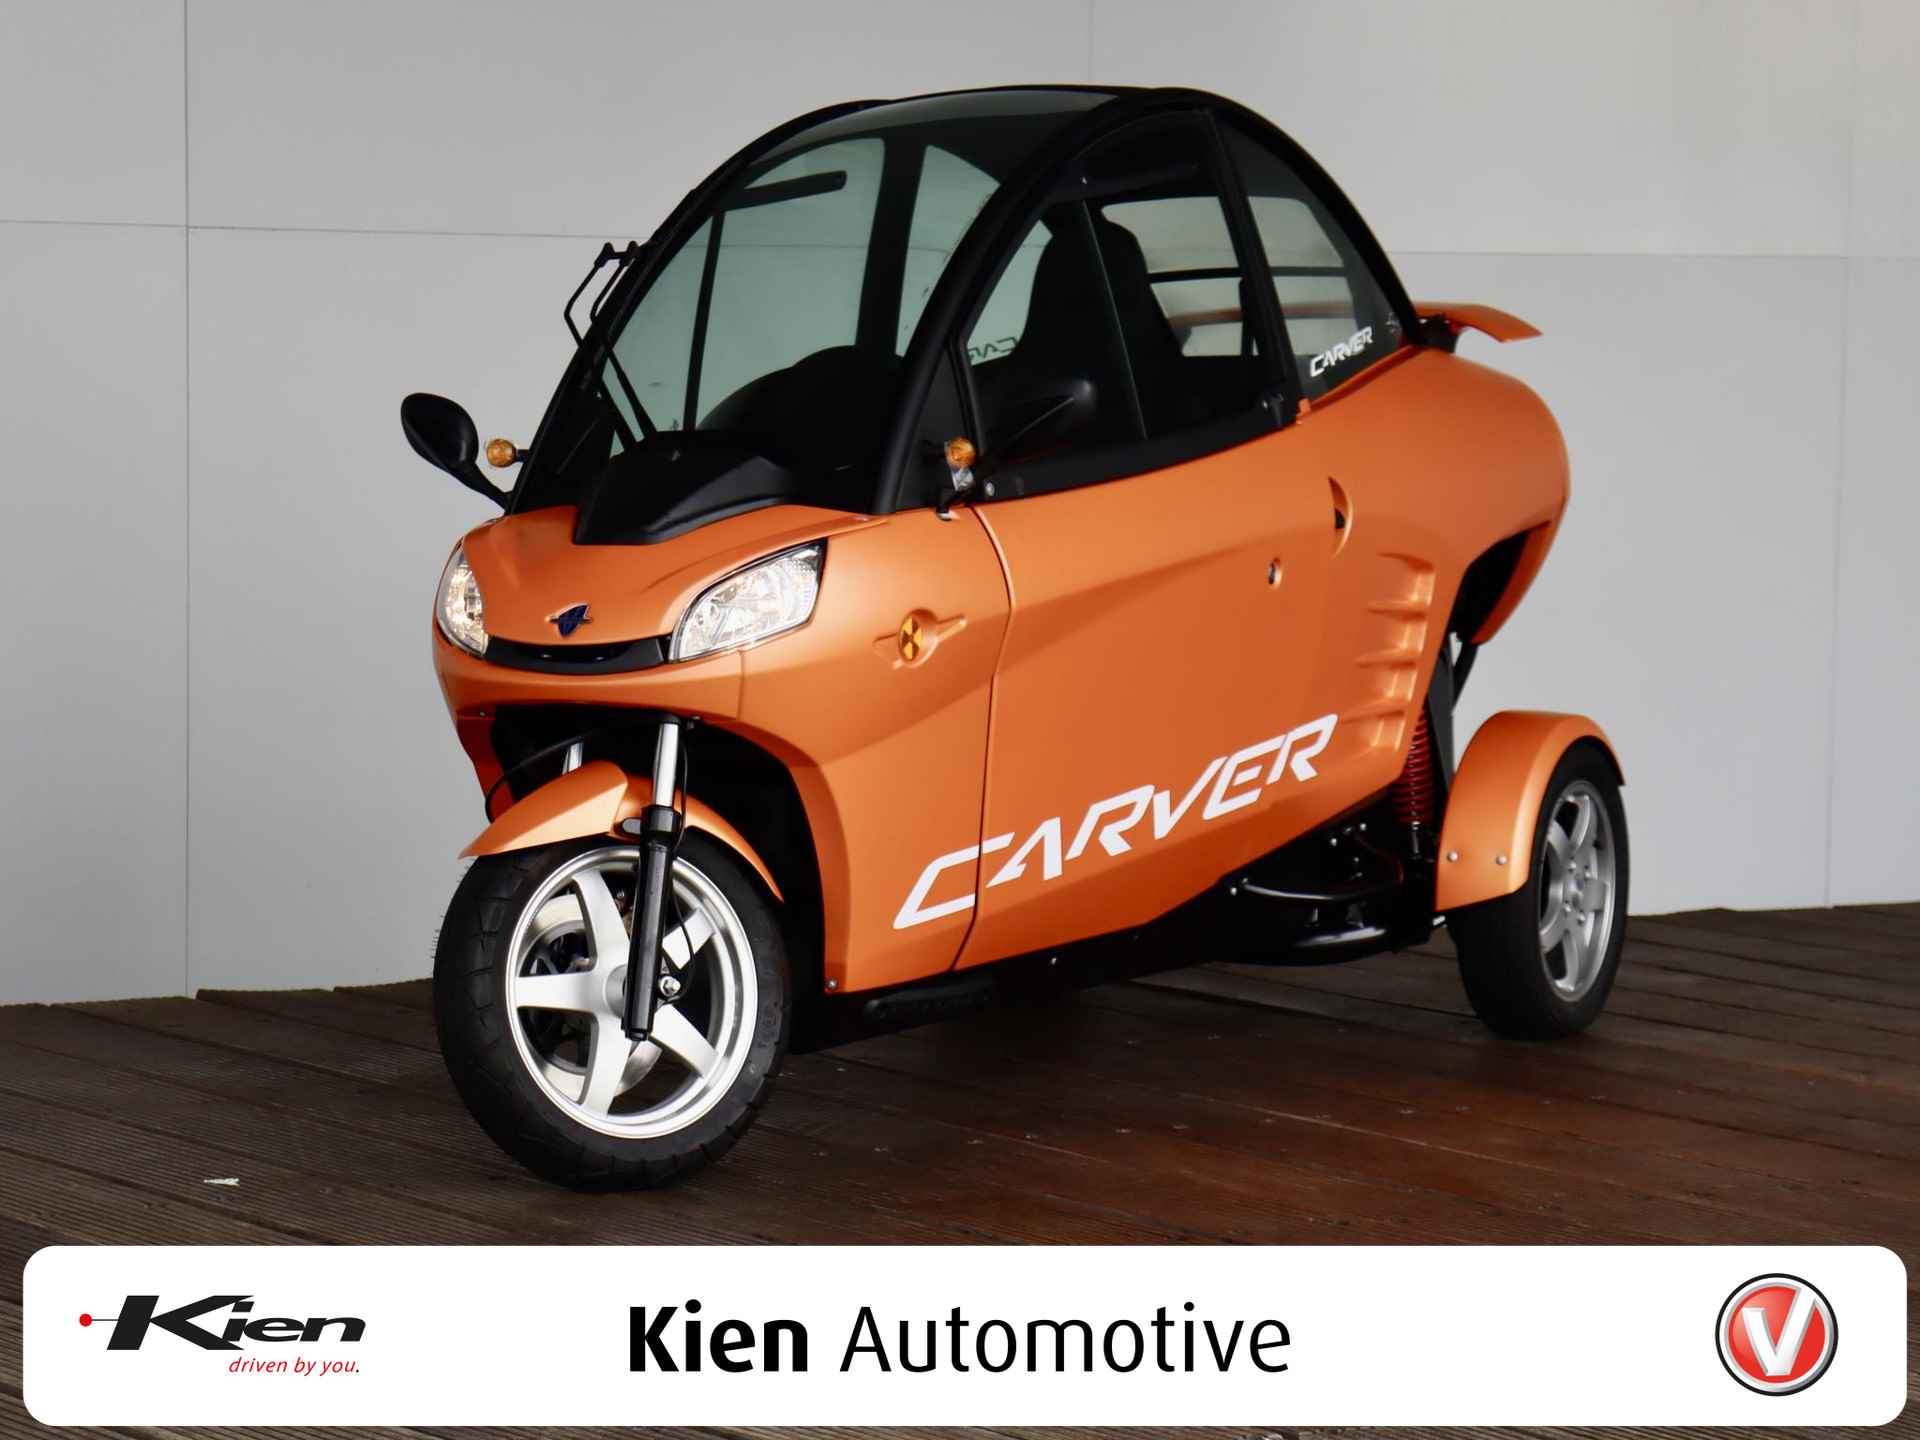 Carver 7.1 kWh S+ | 80 KM | 100% Electric | Bluetooth | Soft top | - 1/23